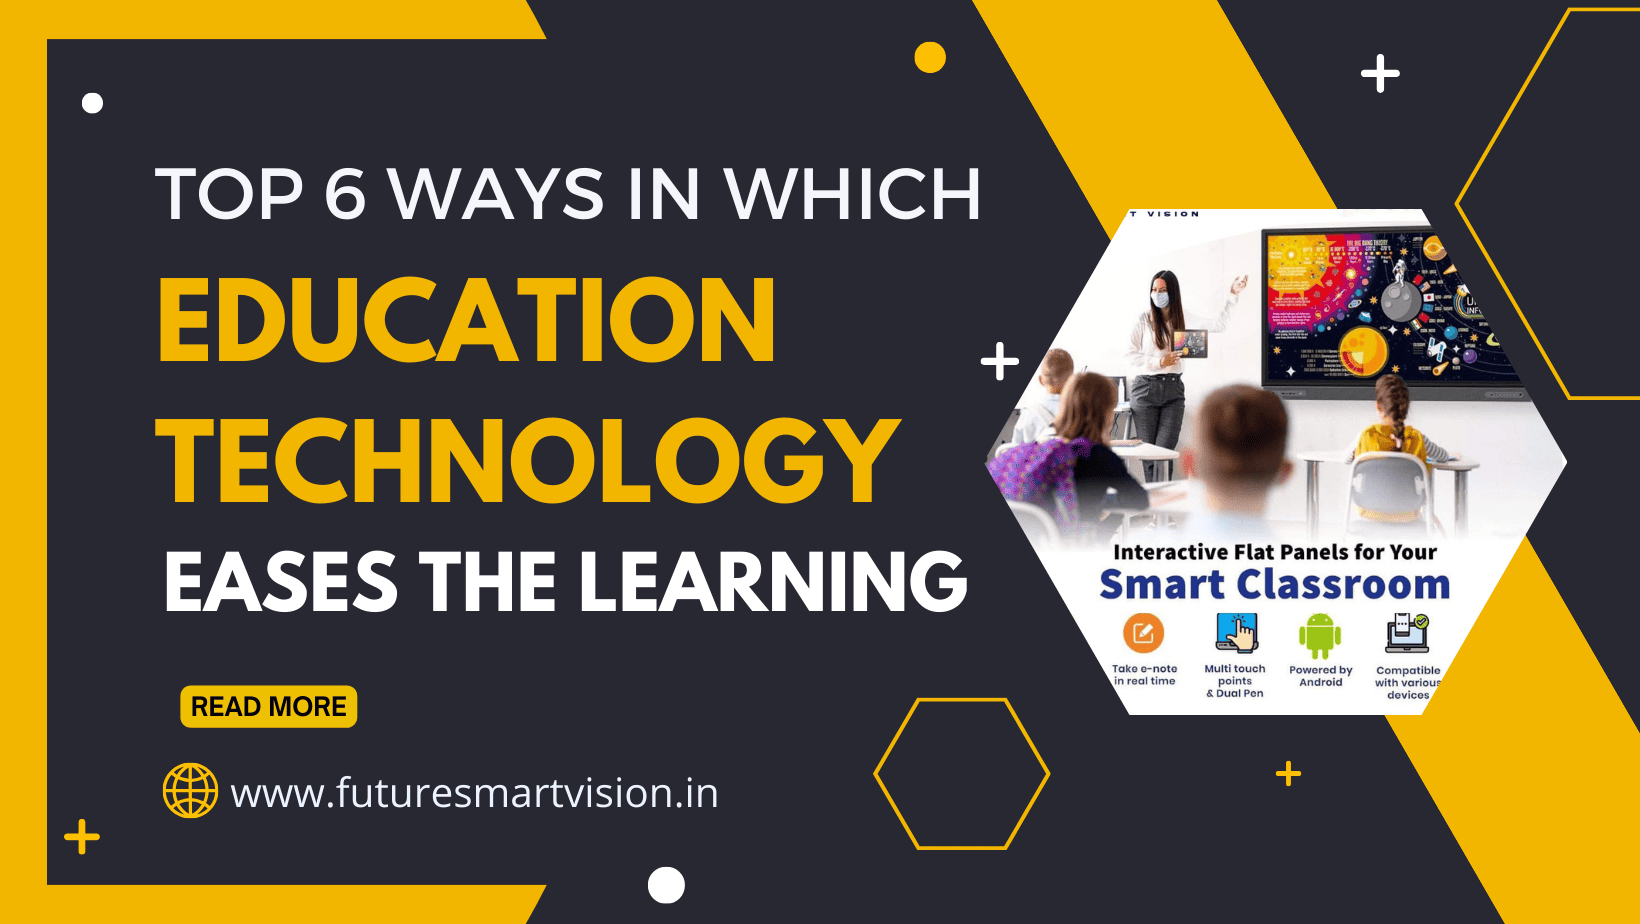 Top 6 Ways in which education technology eases the learning